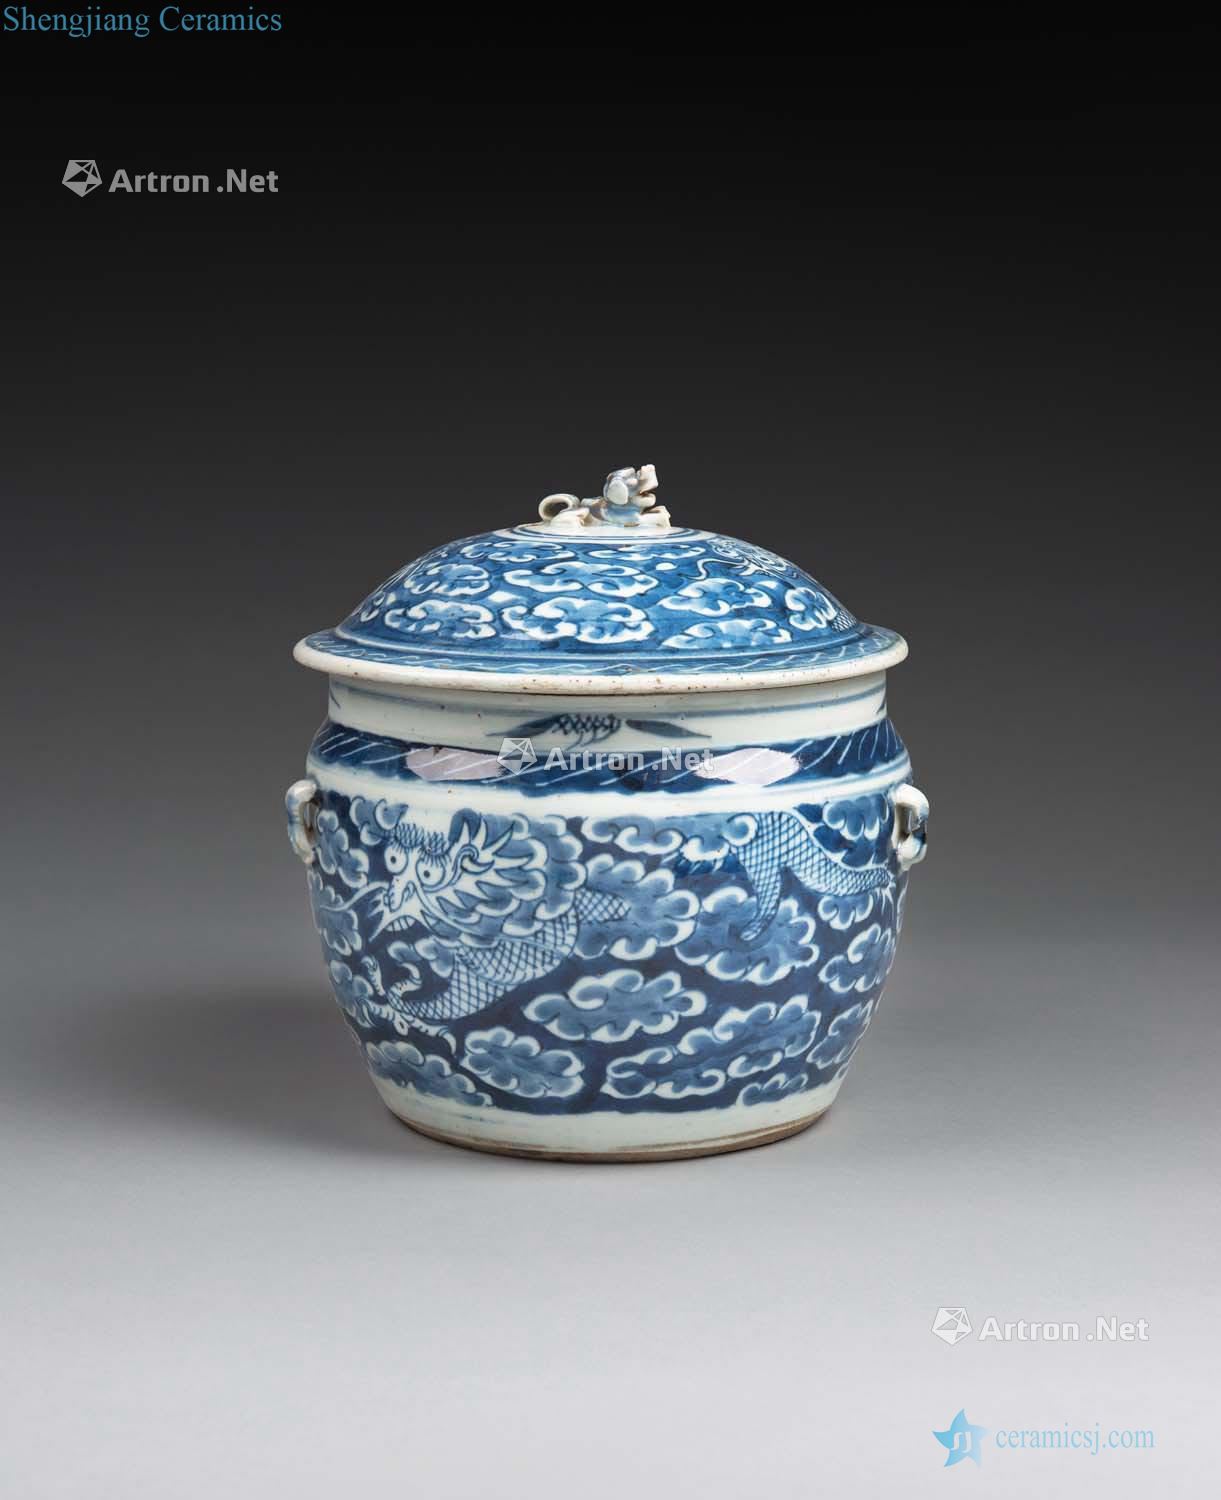 Qing porcelain jar in the 19th century